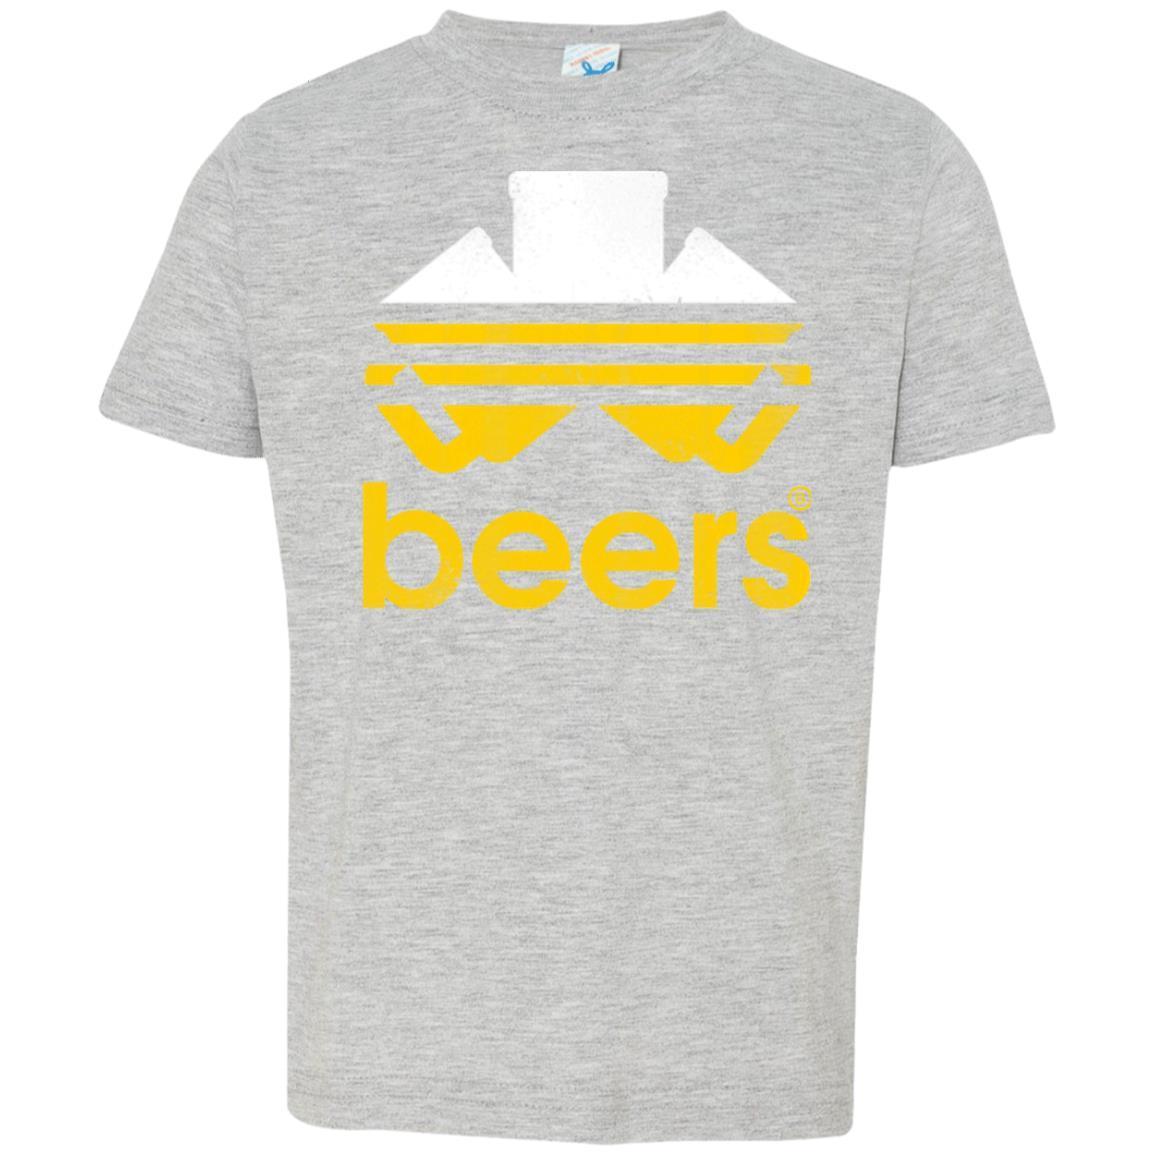 T-Shirts Heather / 2T Beers Toddler Premium T-Shirt